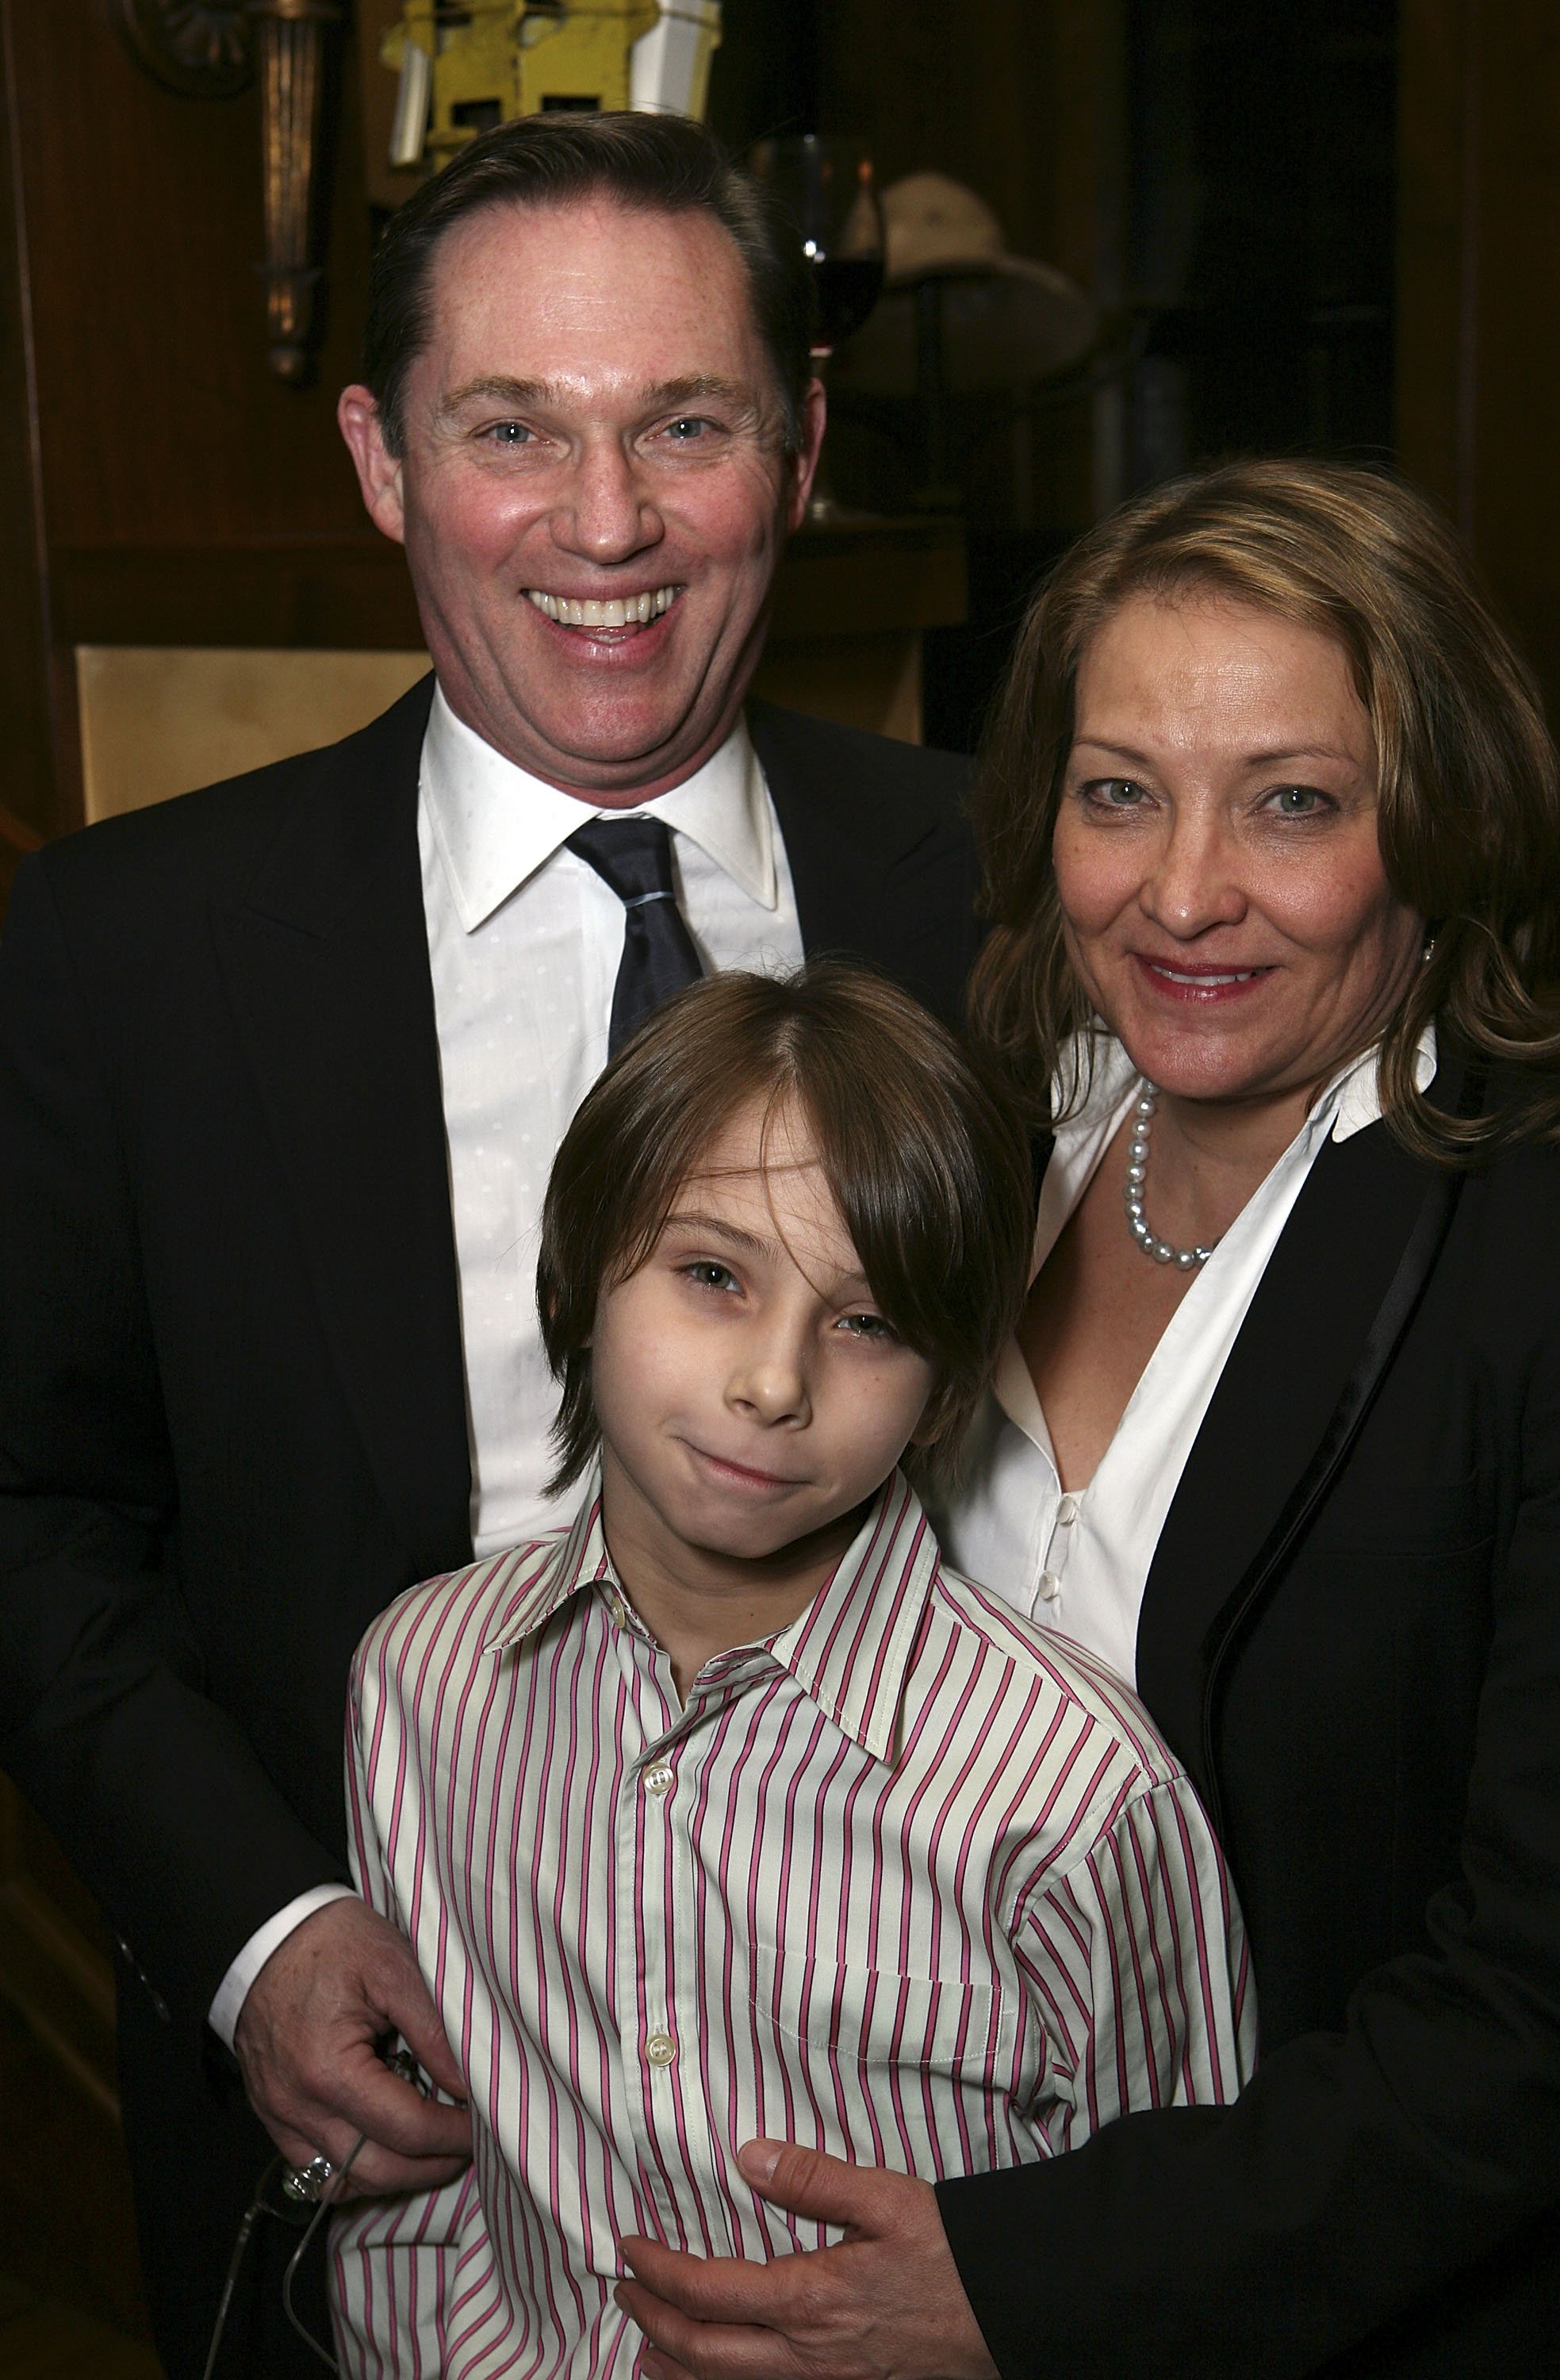 Richard Thomas with his son Montana and his wife Georgiana during the party for the opening night performance of "Twelve Angry Men" on March 29, 2007, in Los Angeles, California | Source: Getty Images